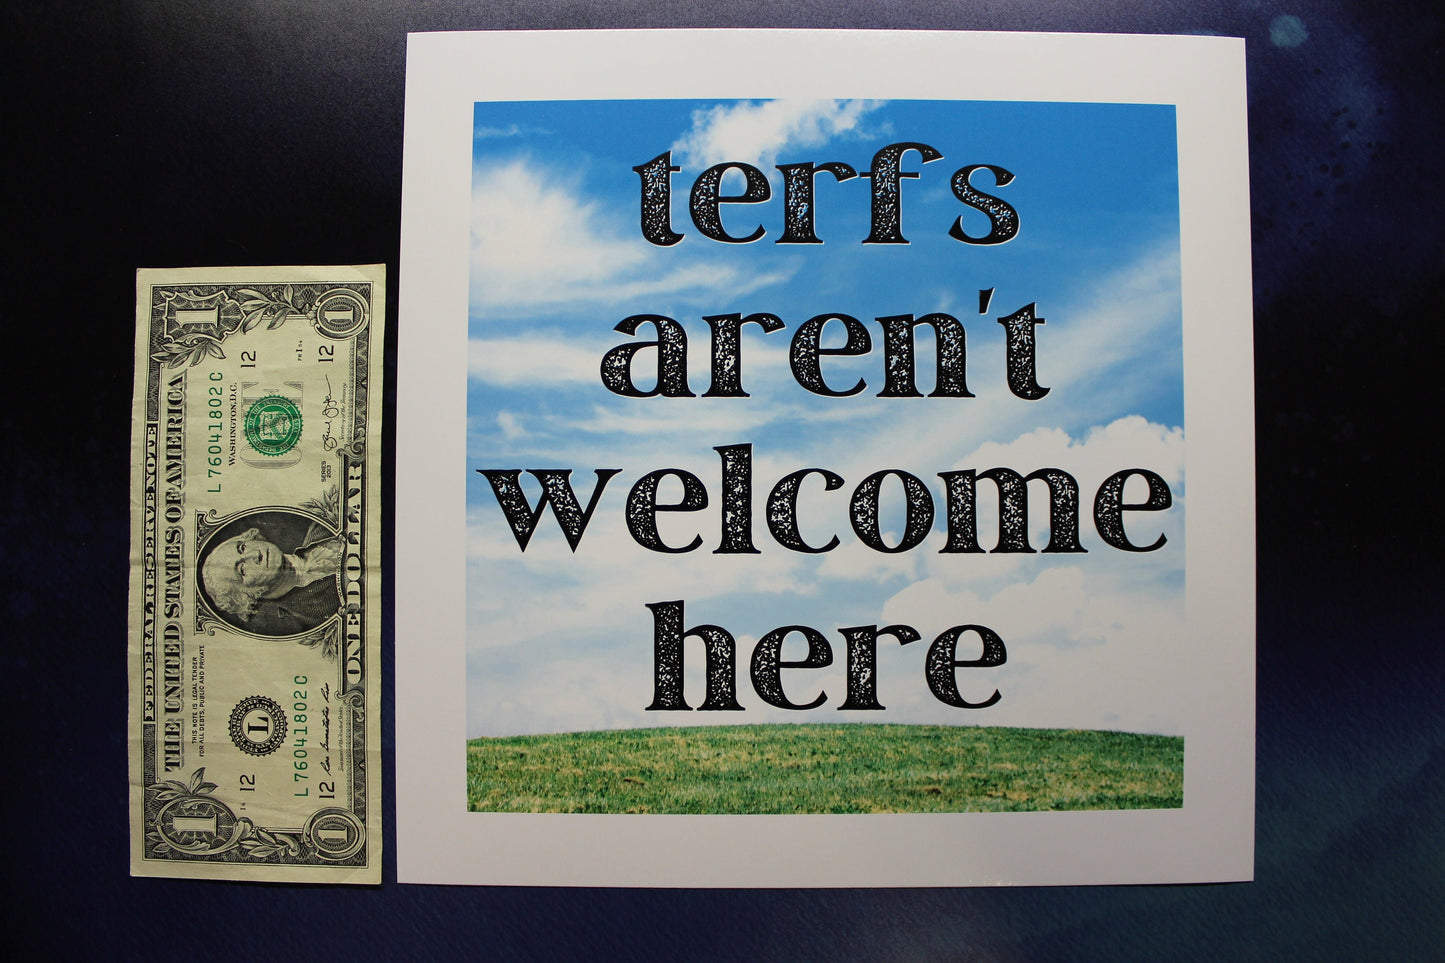 terfs Aren't Welcome Here Art Print Ready To Be Framed